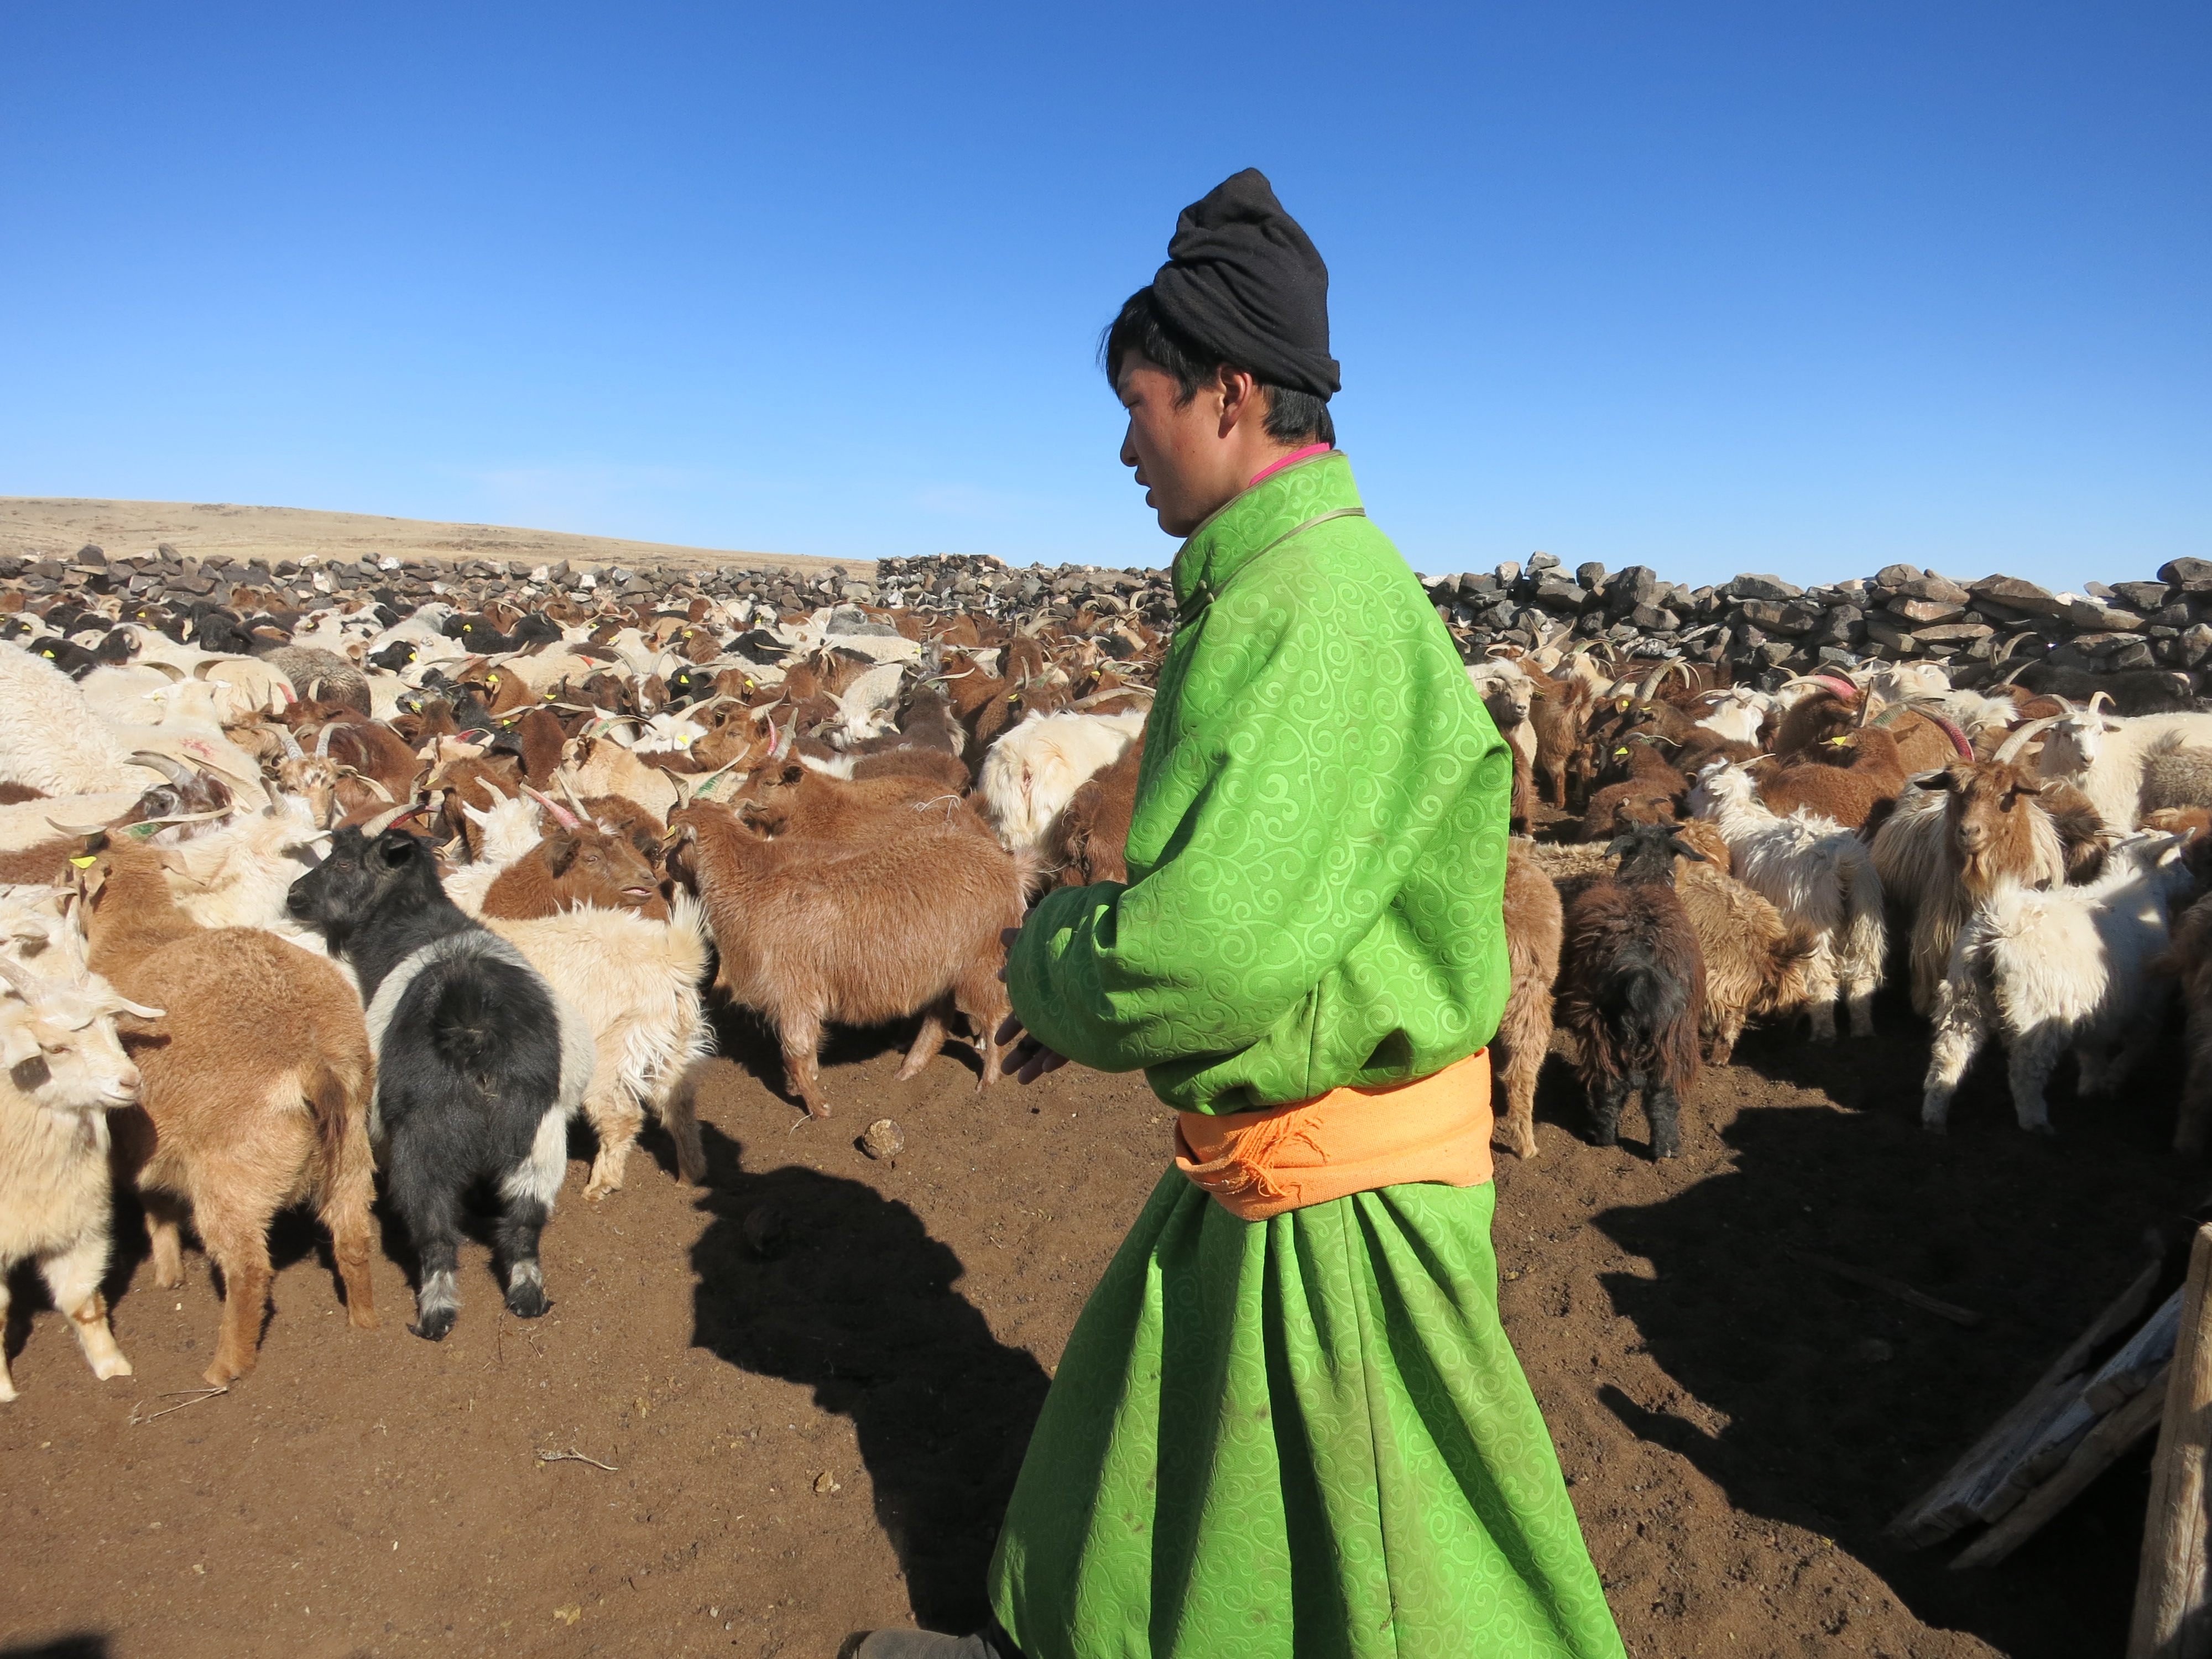 Young man wearing a traditional bright green robe for work with a herd of goats.